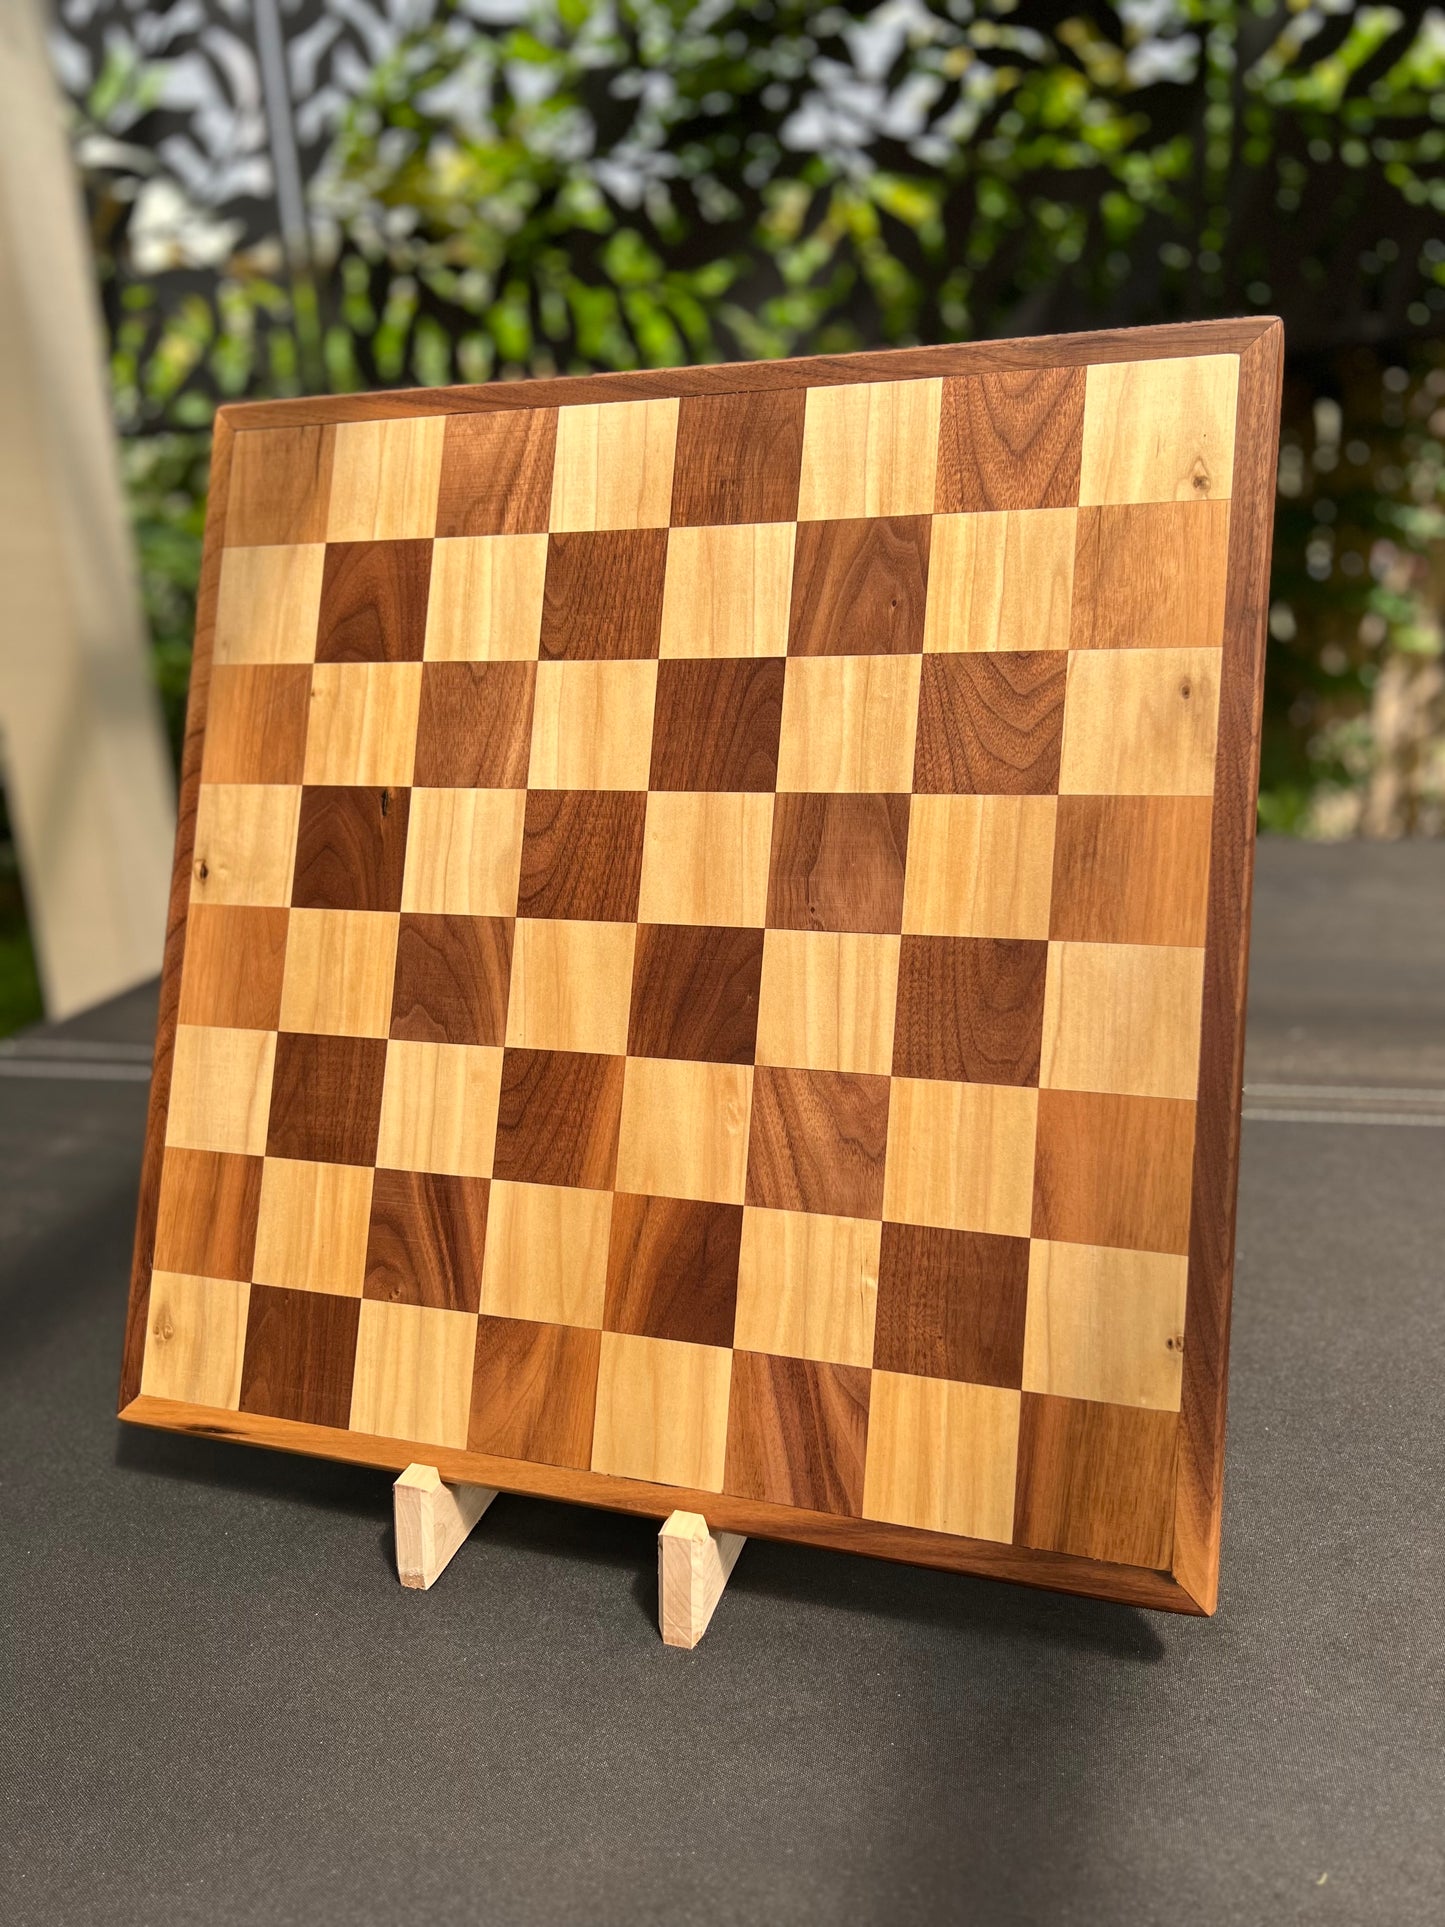 Large Chess Board - Walnut and Maple